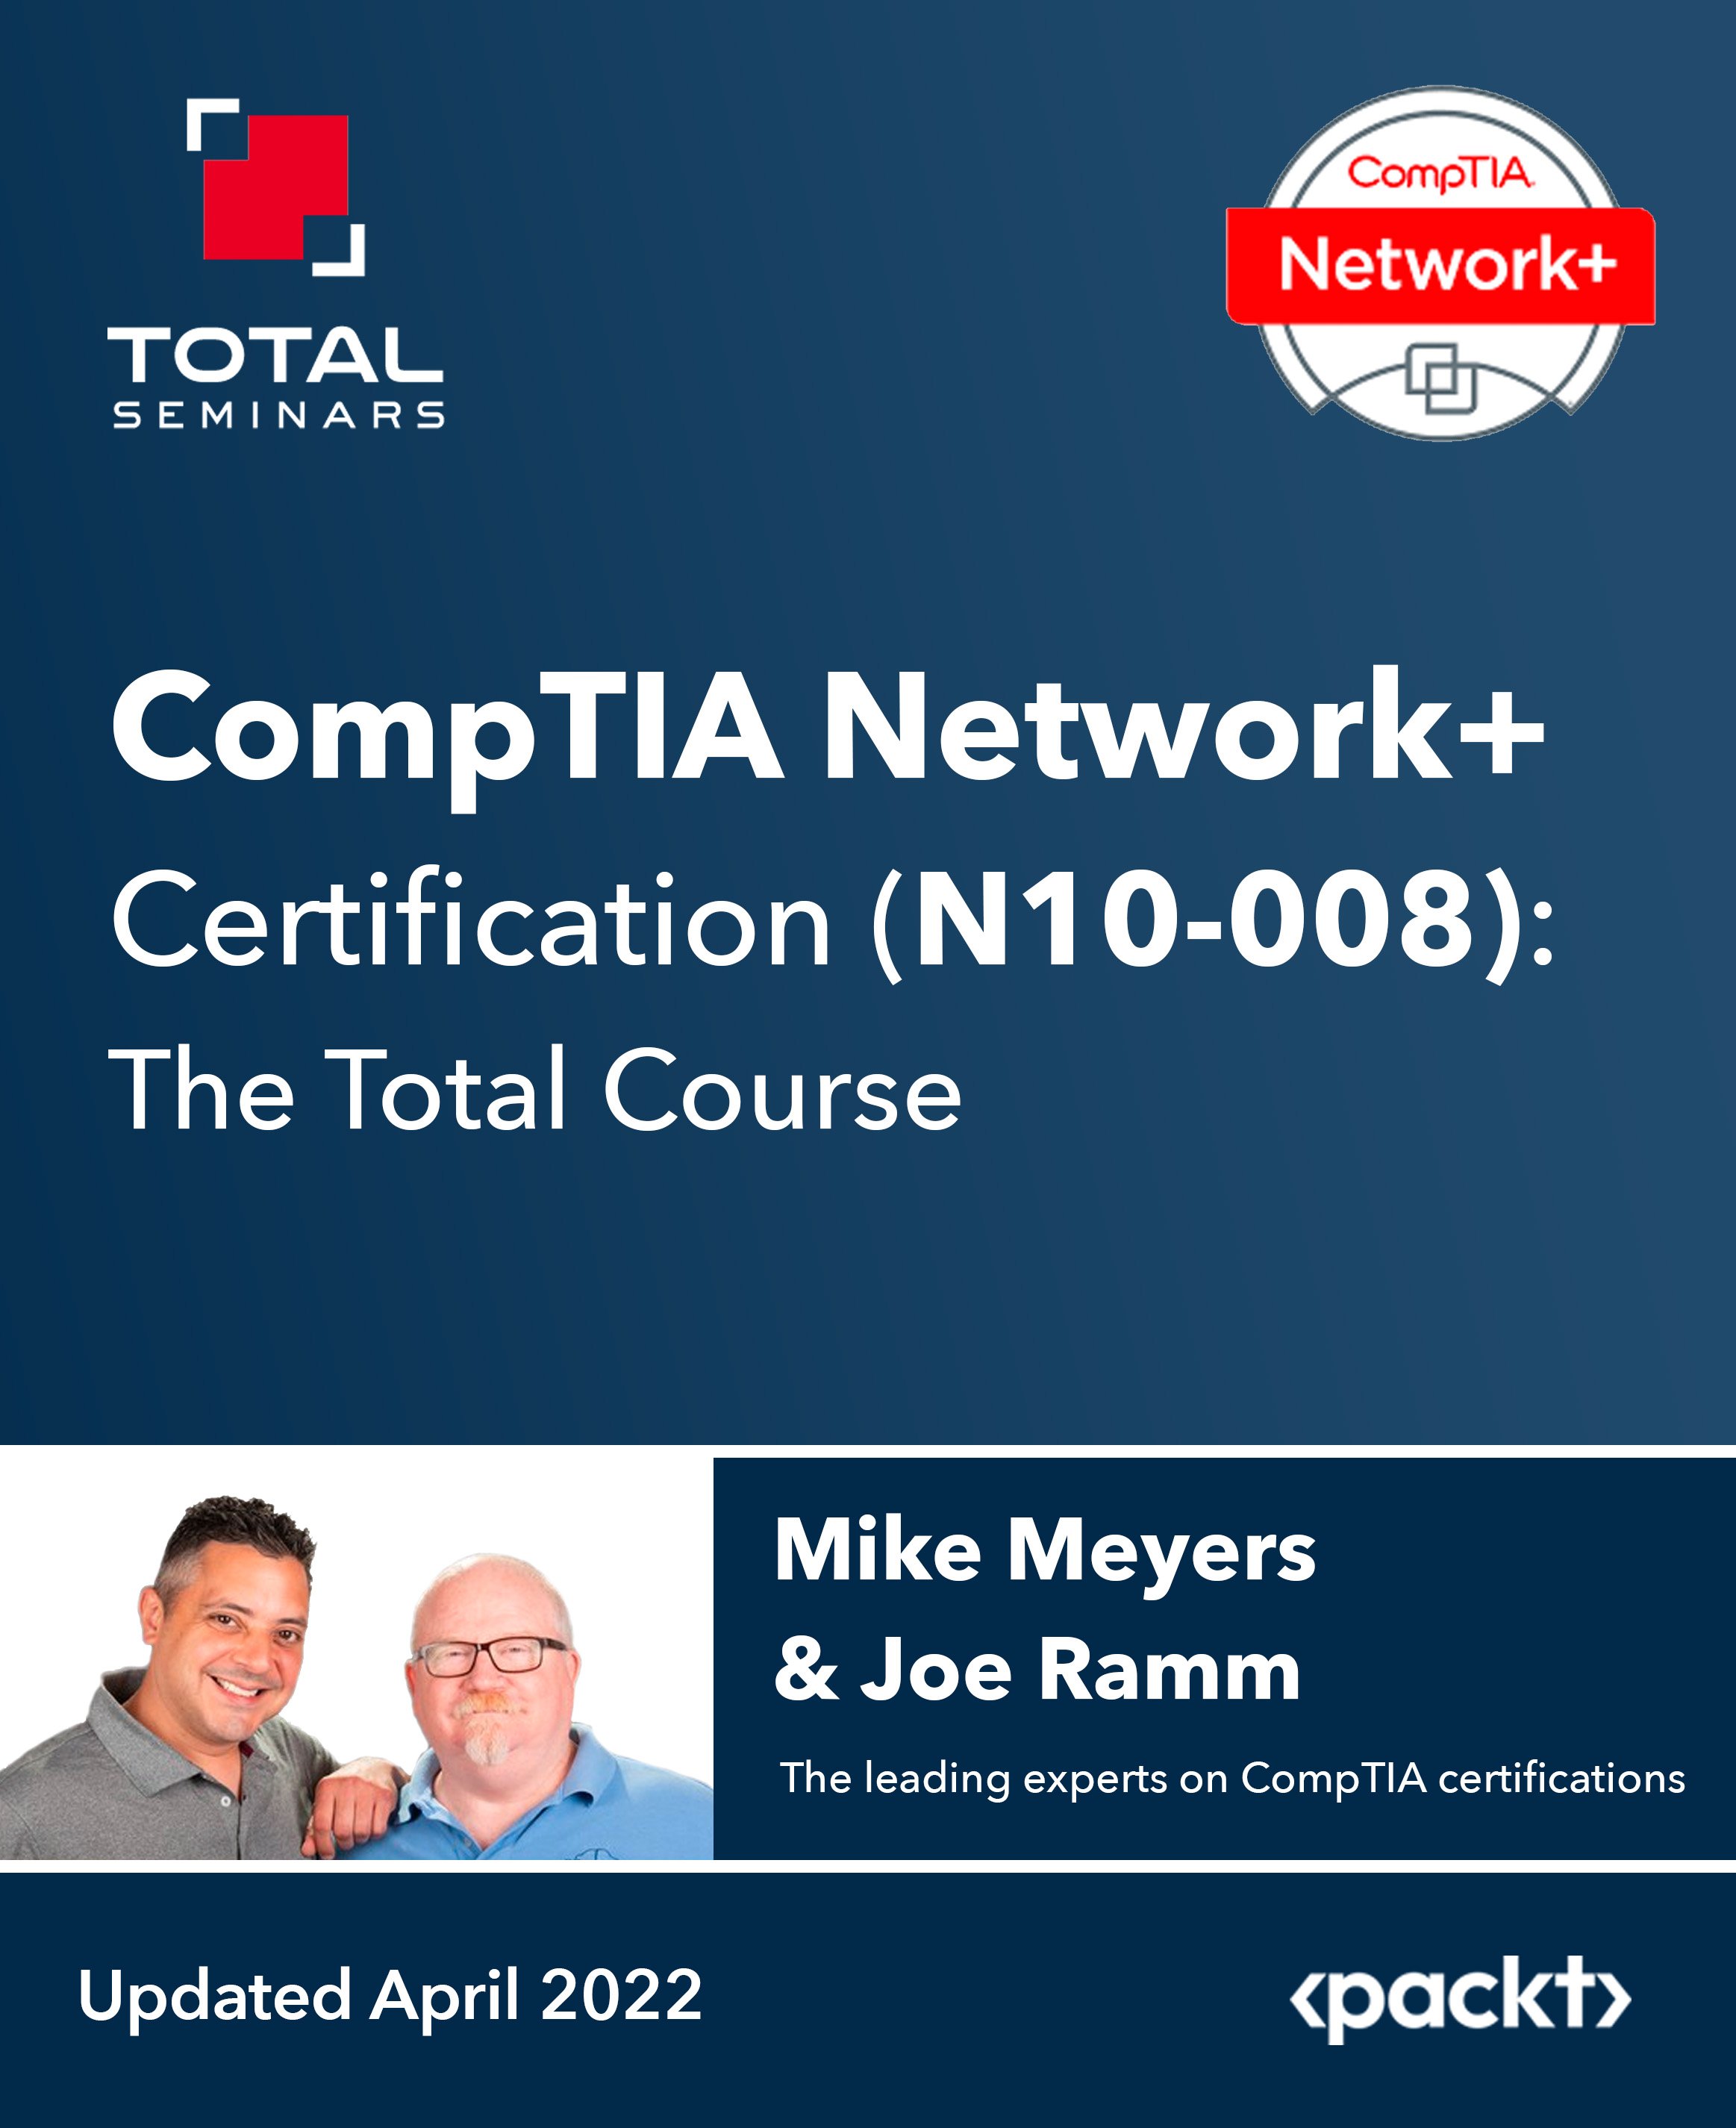 CompTIA Network+ Certification (N10-008): The Total Course